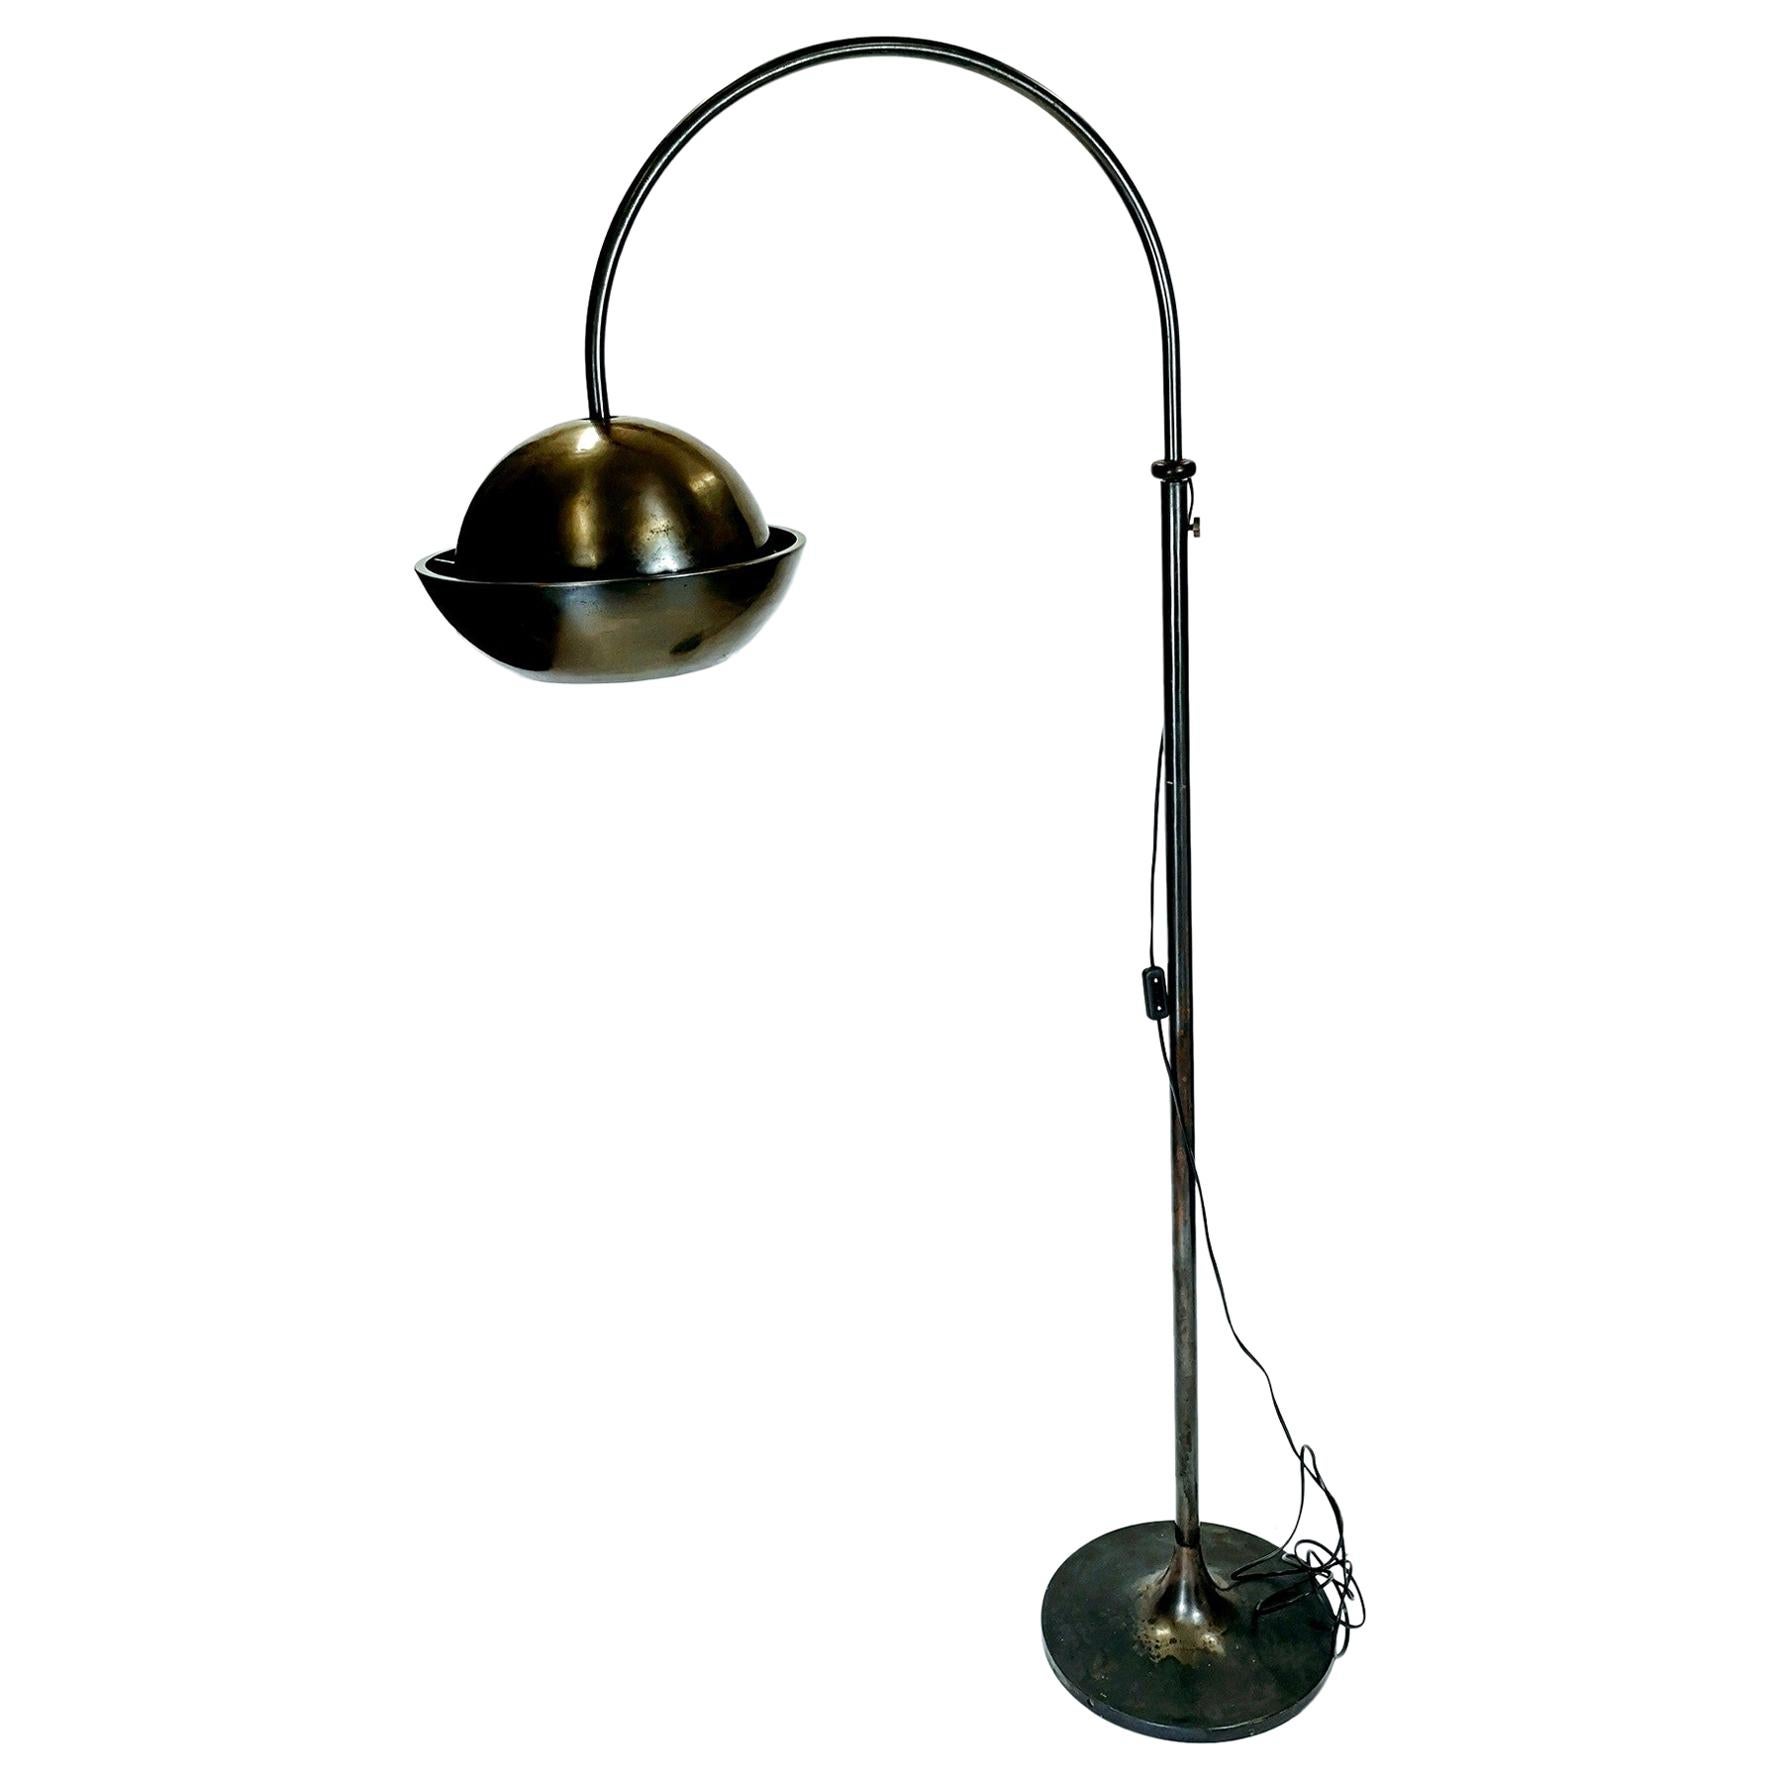 Mid-Century Modern Patinated Copper Floor Lamp from the 1960s